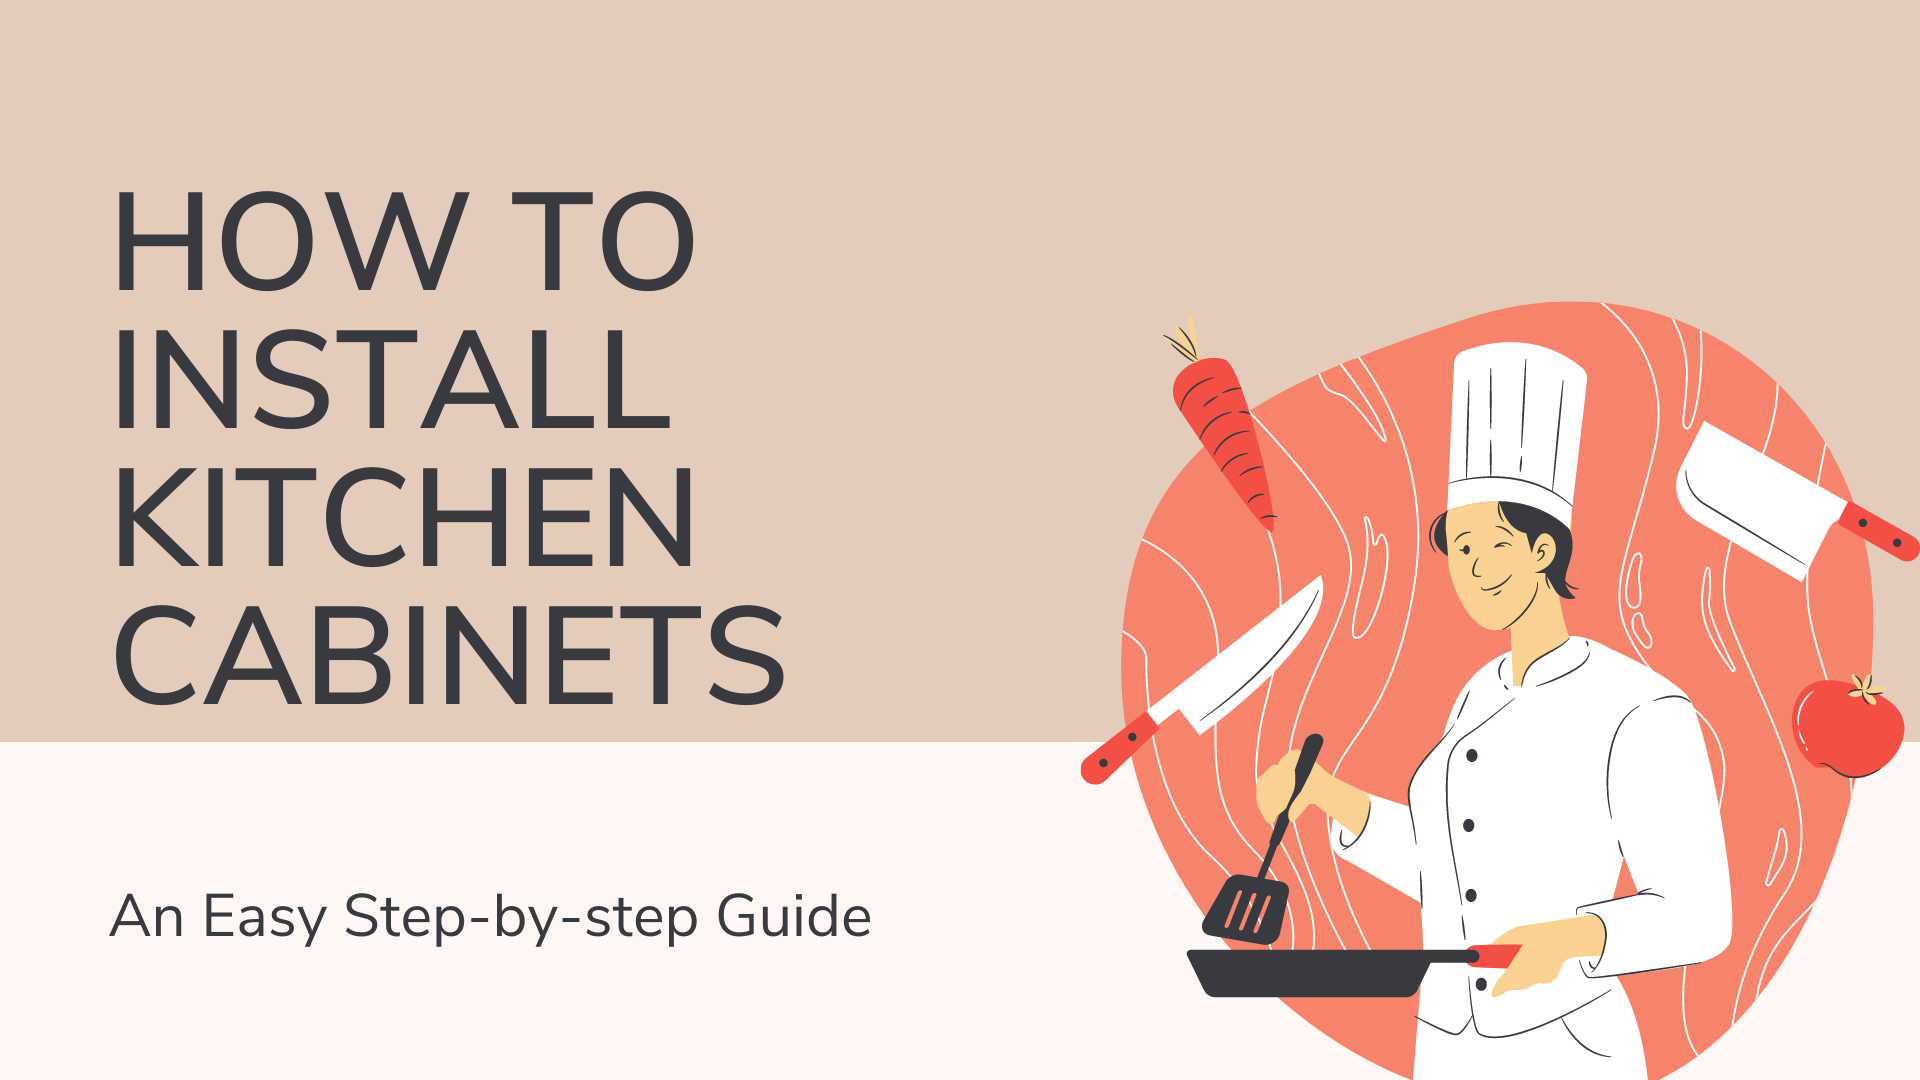 How to Install Kitchen Cabinets? An Easy Step-by-step Guide